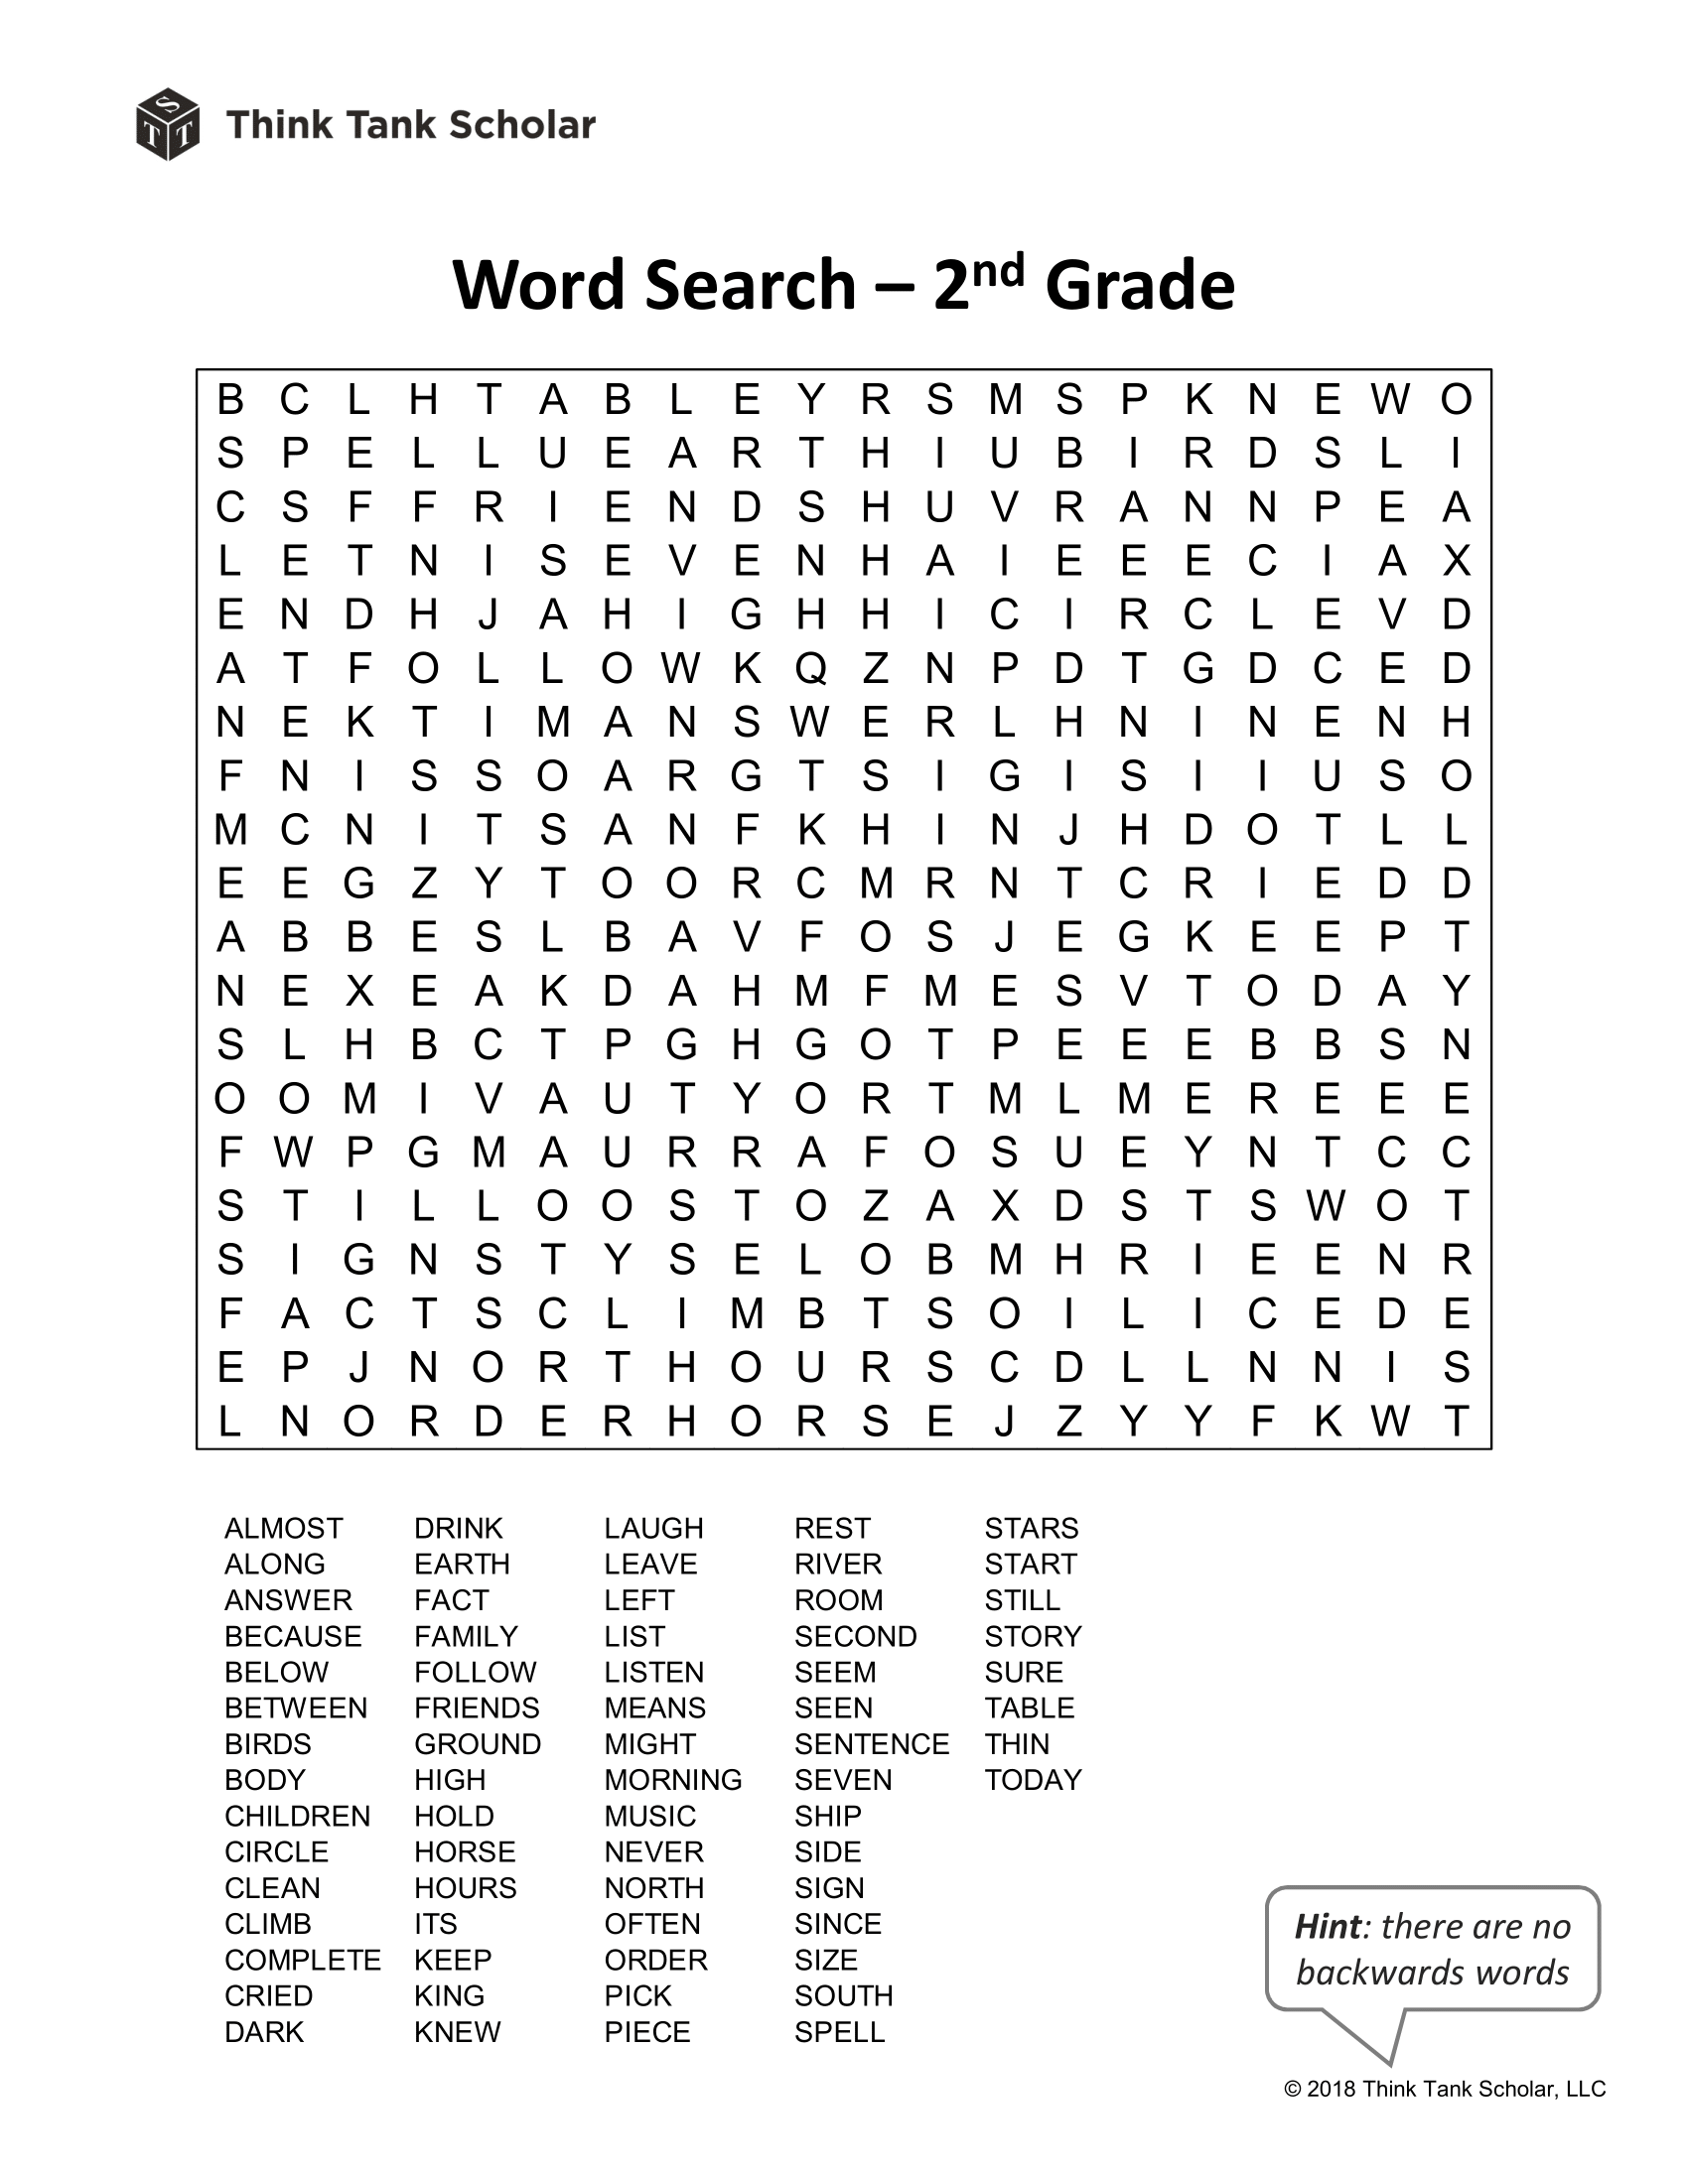 Sight Words Worksheet (FREE) Word Search 22nd Grade Printable Pertaining To 2nd Grade Sight Words Worksheet